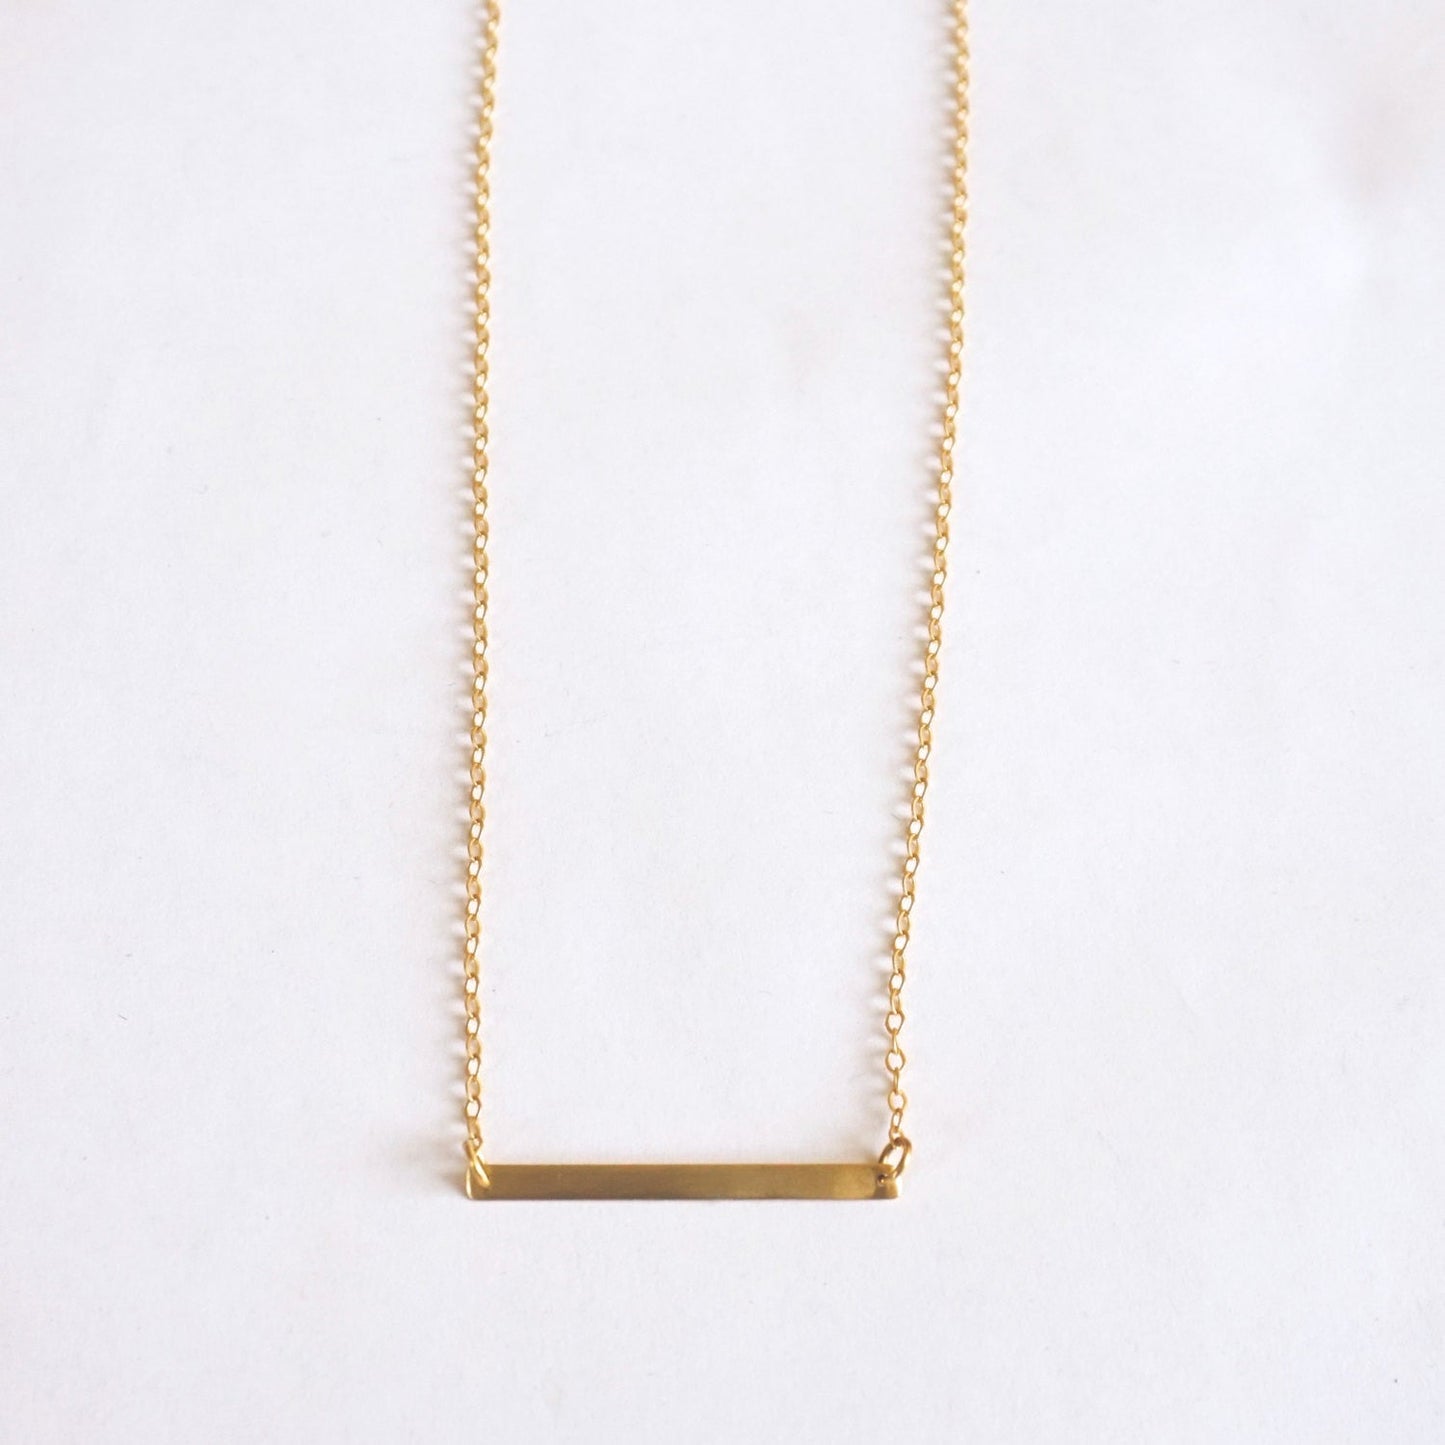 Minimalistic Nameplate Necklace with clasp brass necklace jewelry Sterling Silver bar jewelry simple geometric rectangle necklace 006 - Patination Design